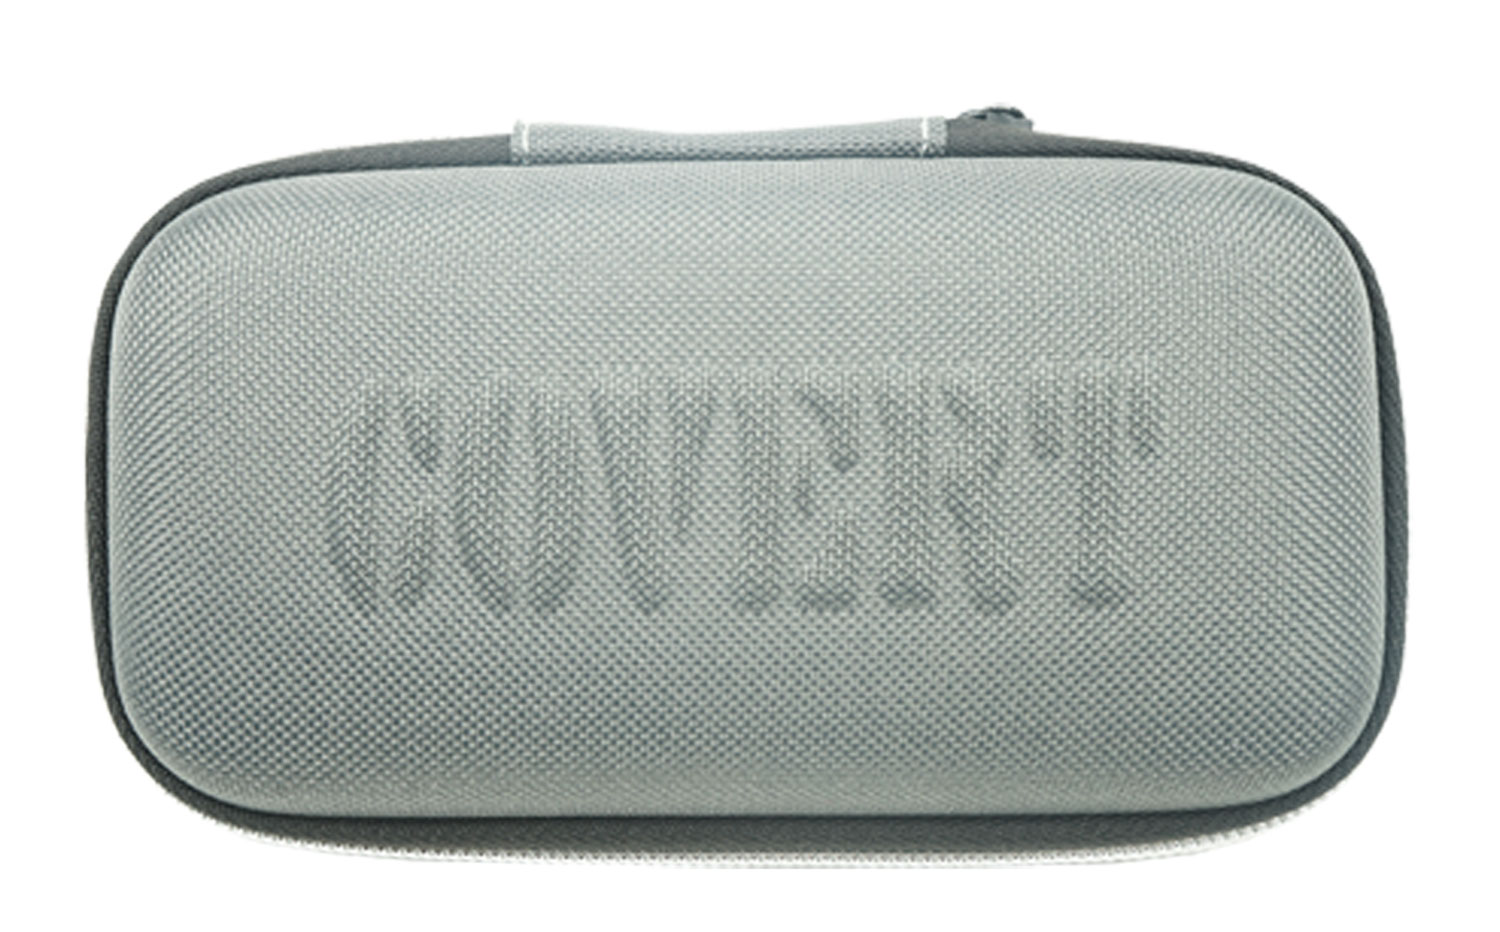 COVERT CAMERA ZIPPERED MOLDED SD CARD CASE HOLDS 25 SD CARDS